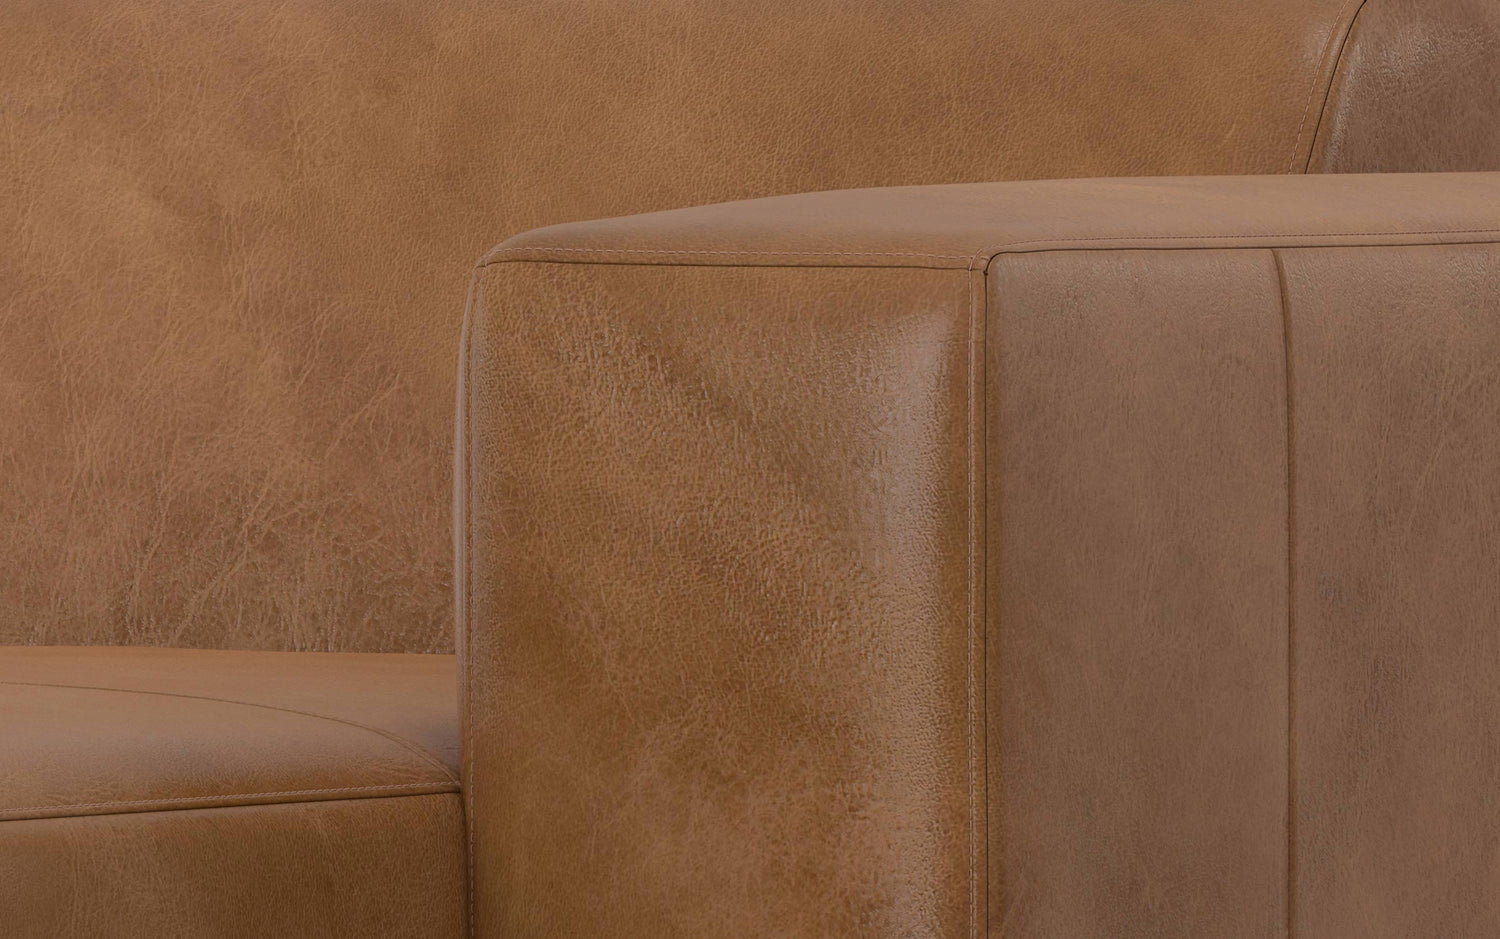 Caramel Brown Genuine Leather |  Rex Right Chaise Module in Genuine Leather